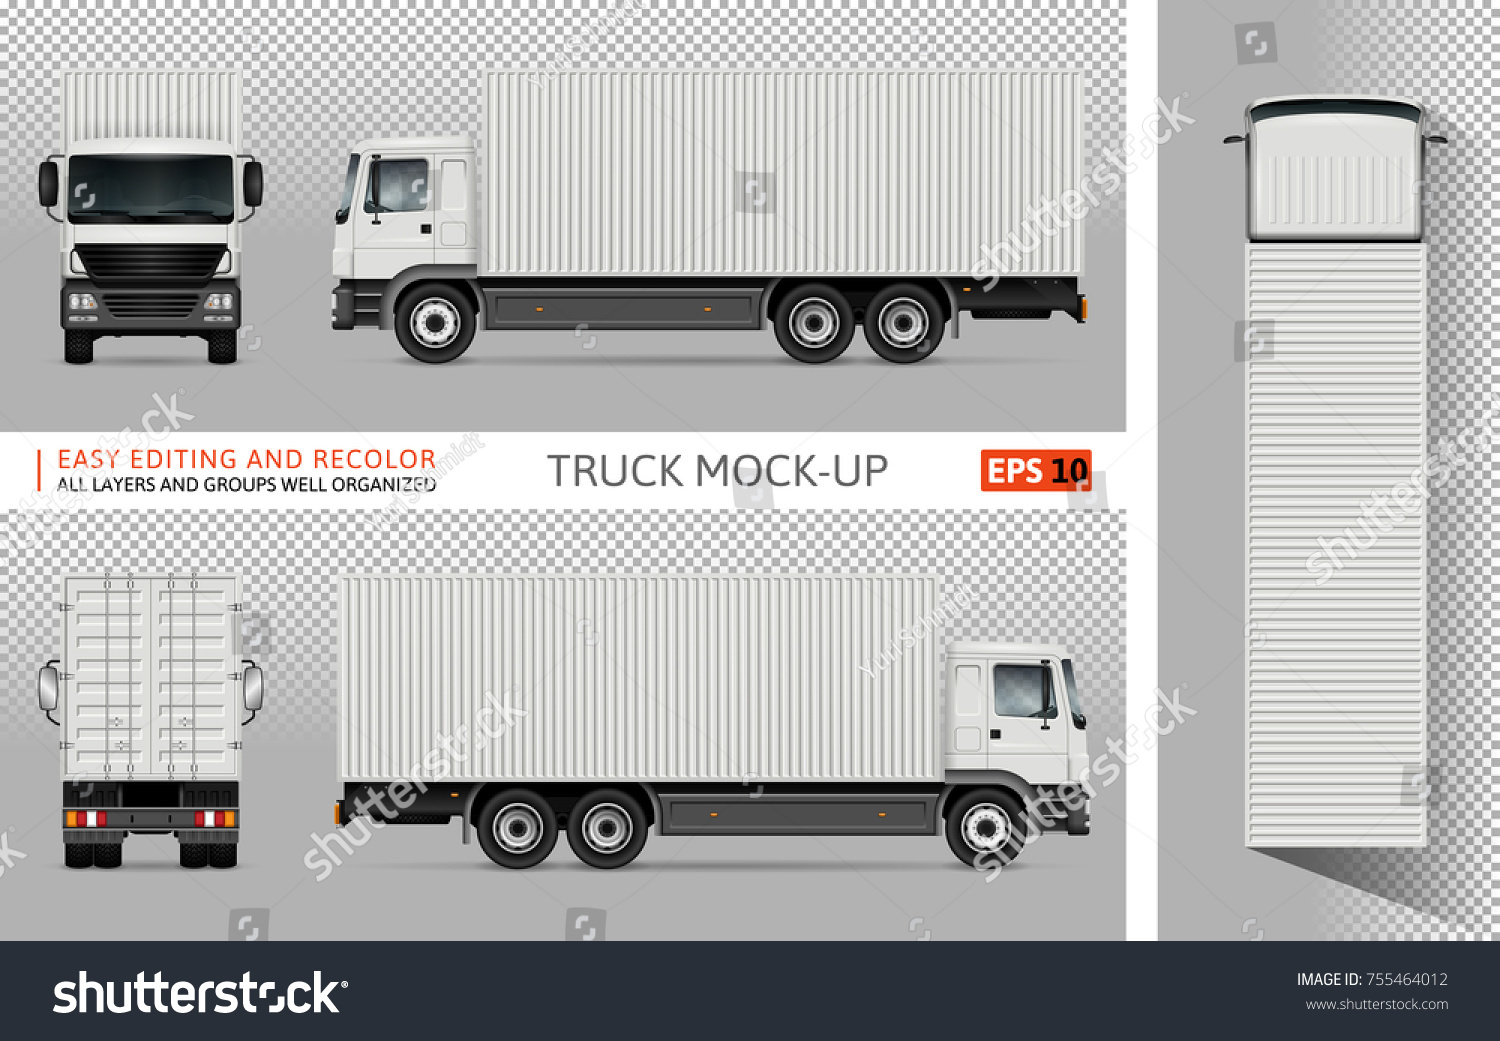 SVG of Container truck vector mock up for advertising, corporate identity. Isolated template of the lorry on transparent background. Vehicle branding mockup. View from side, front, back and top. svg